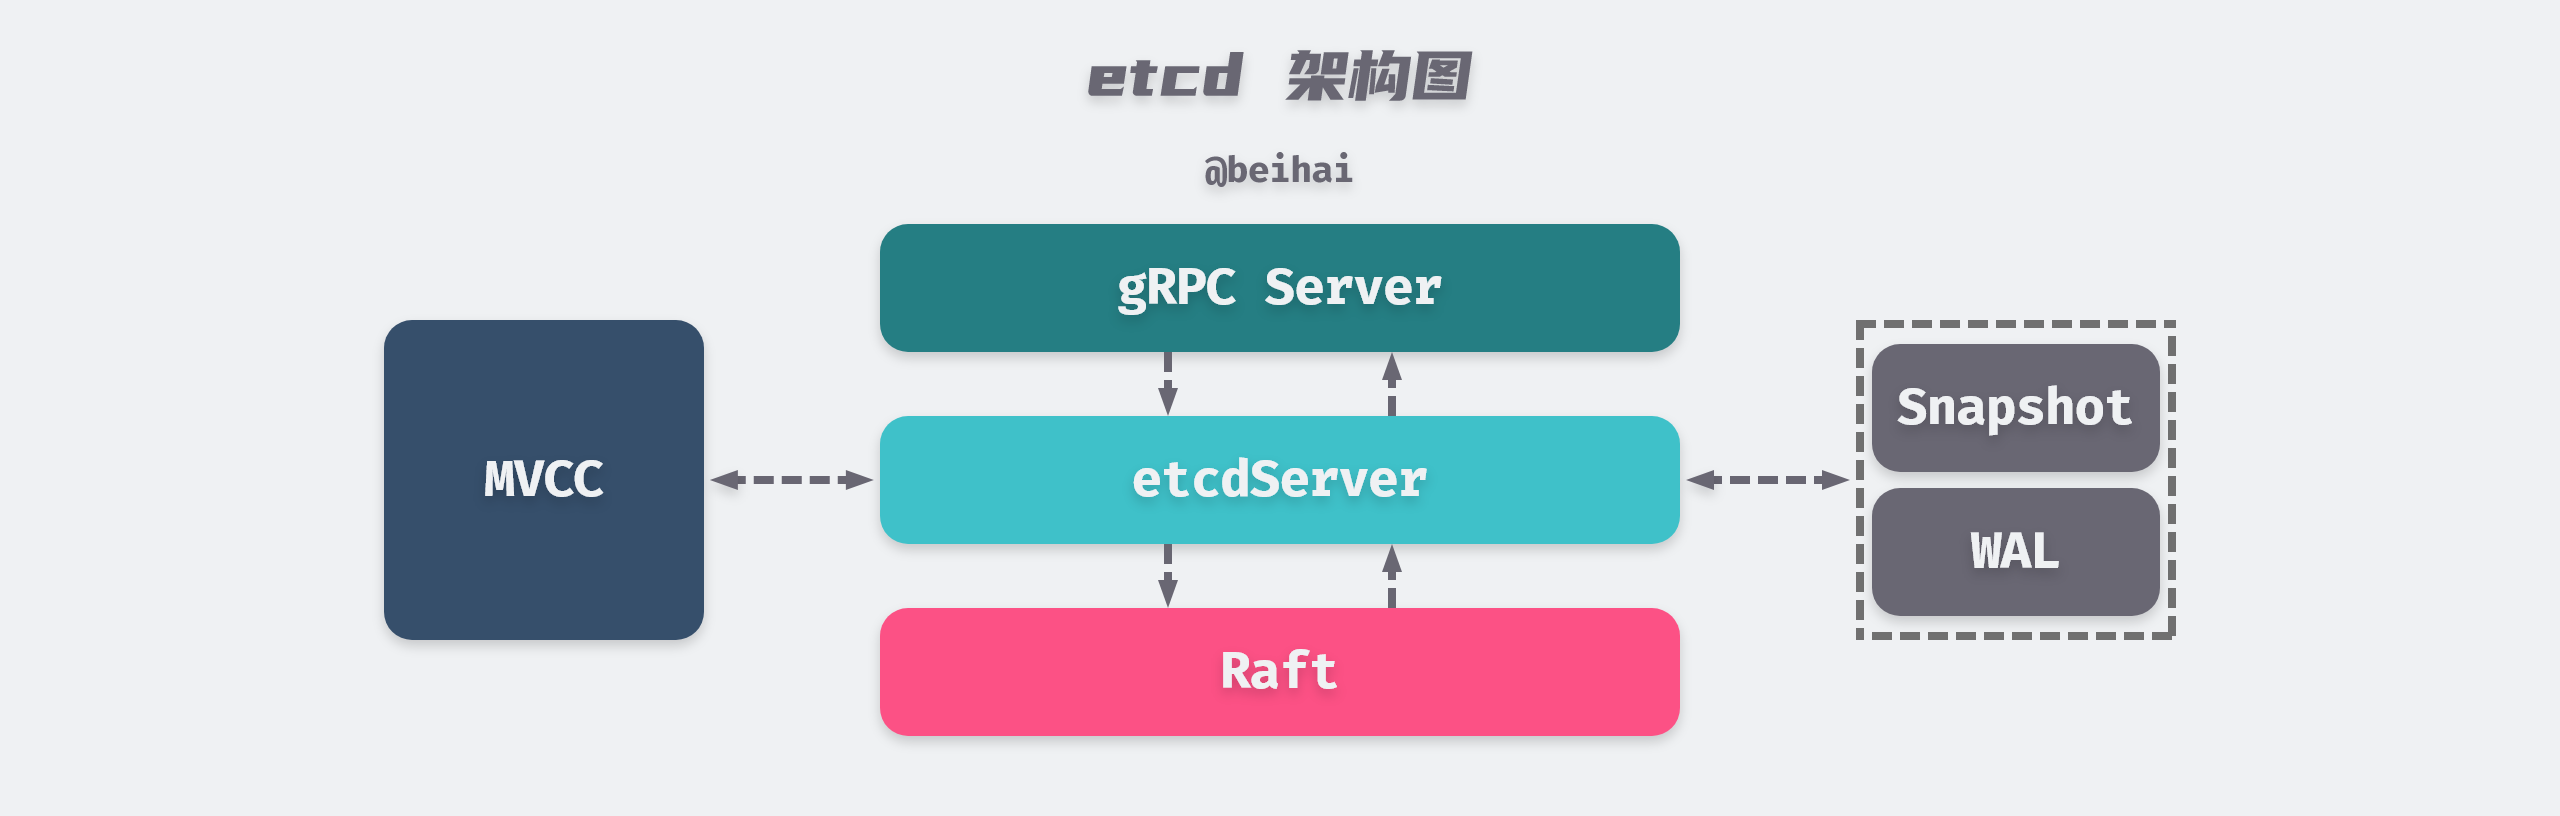 /posts/database/etcd/etcd-Architecture@2x.png